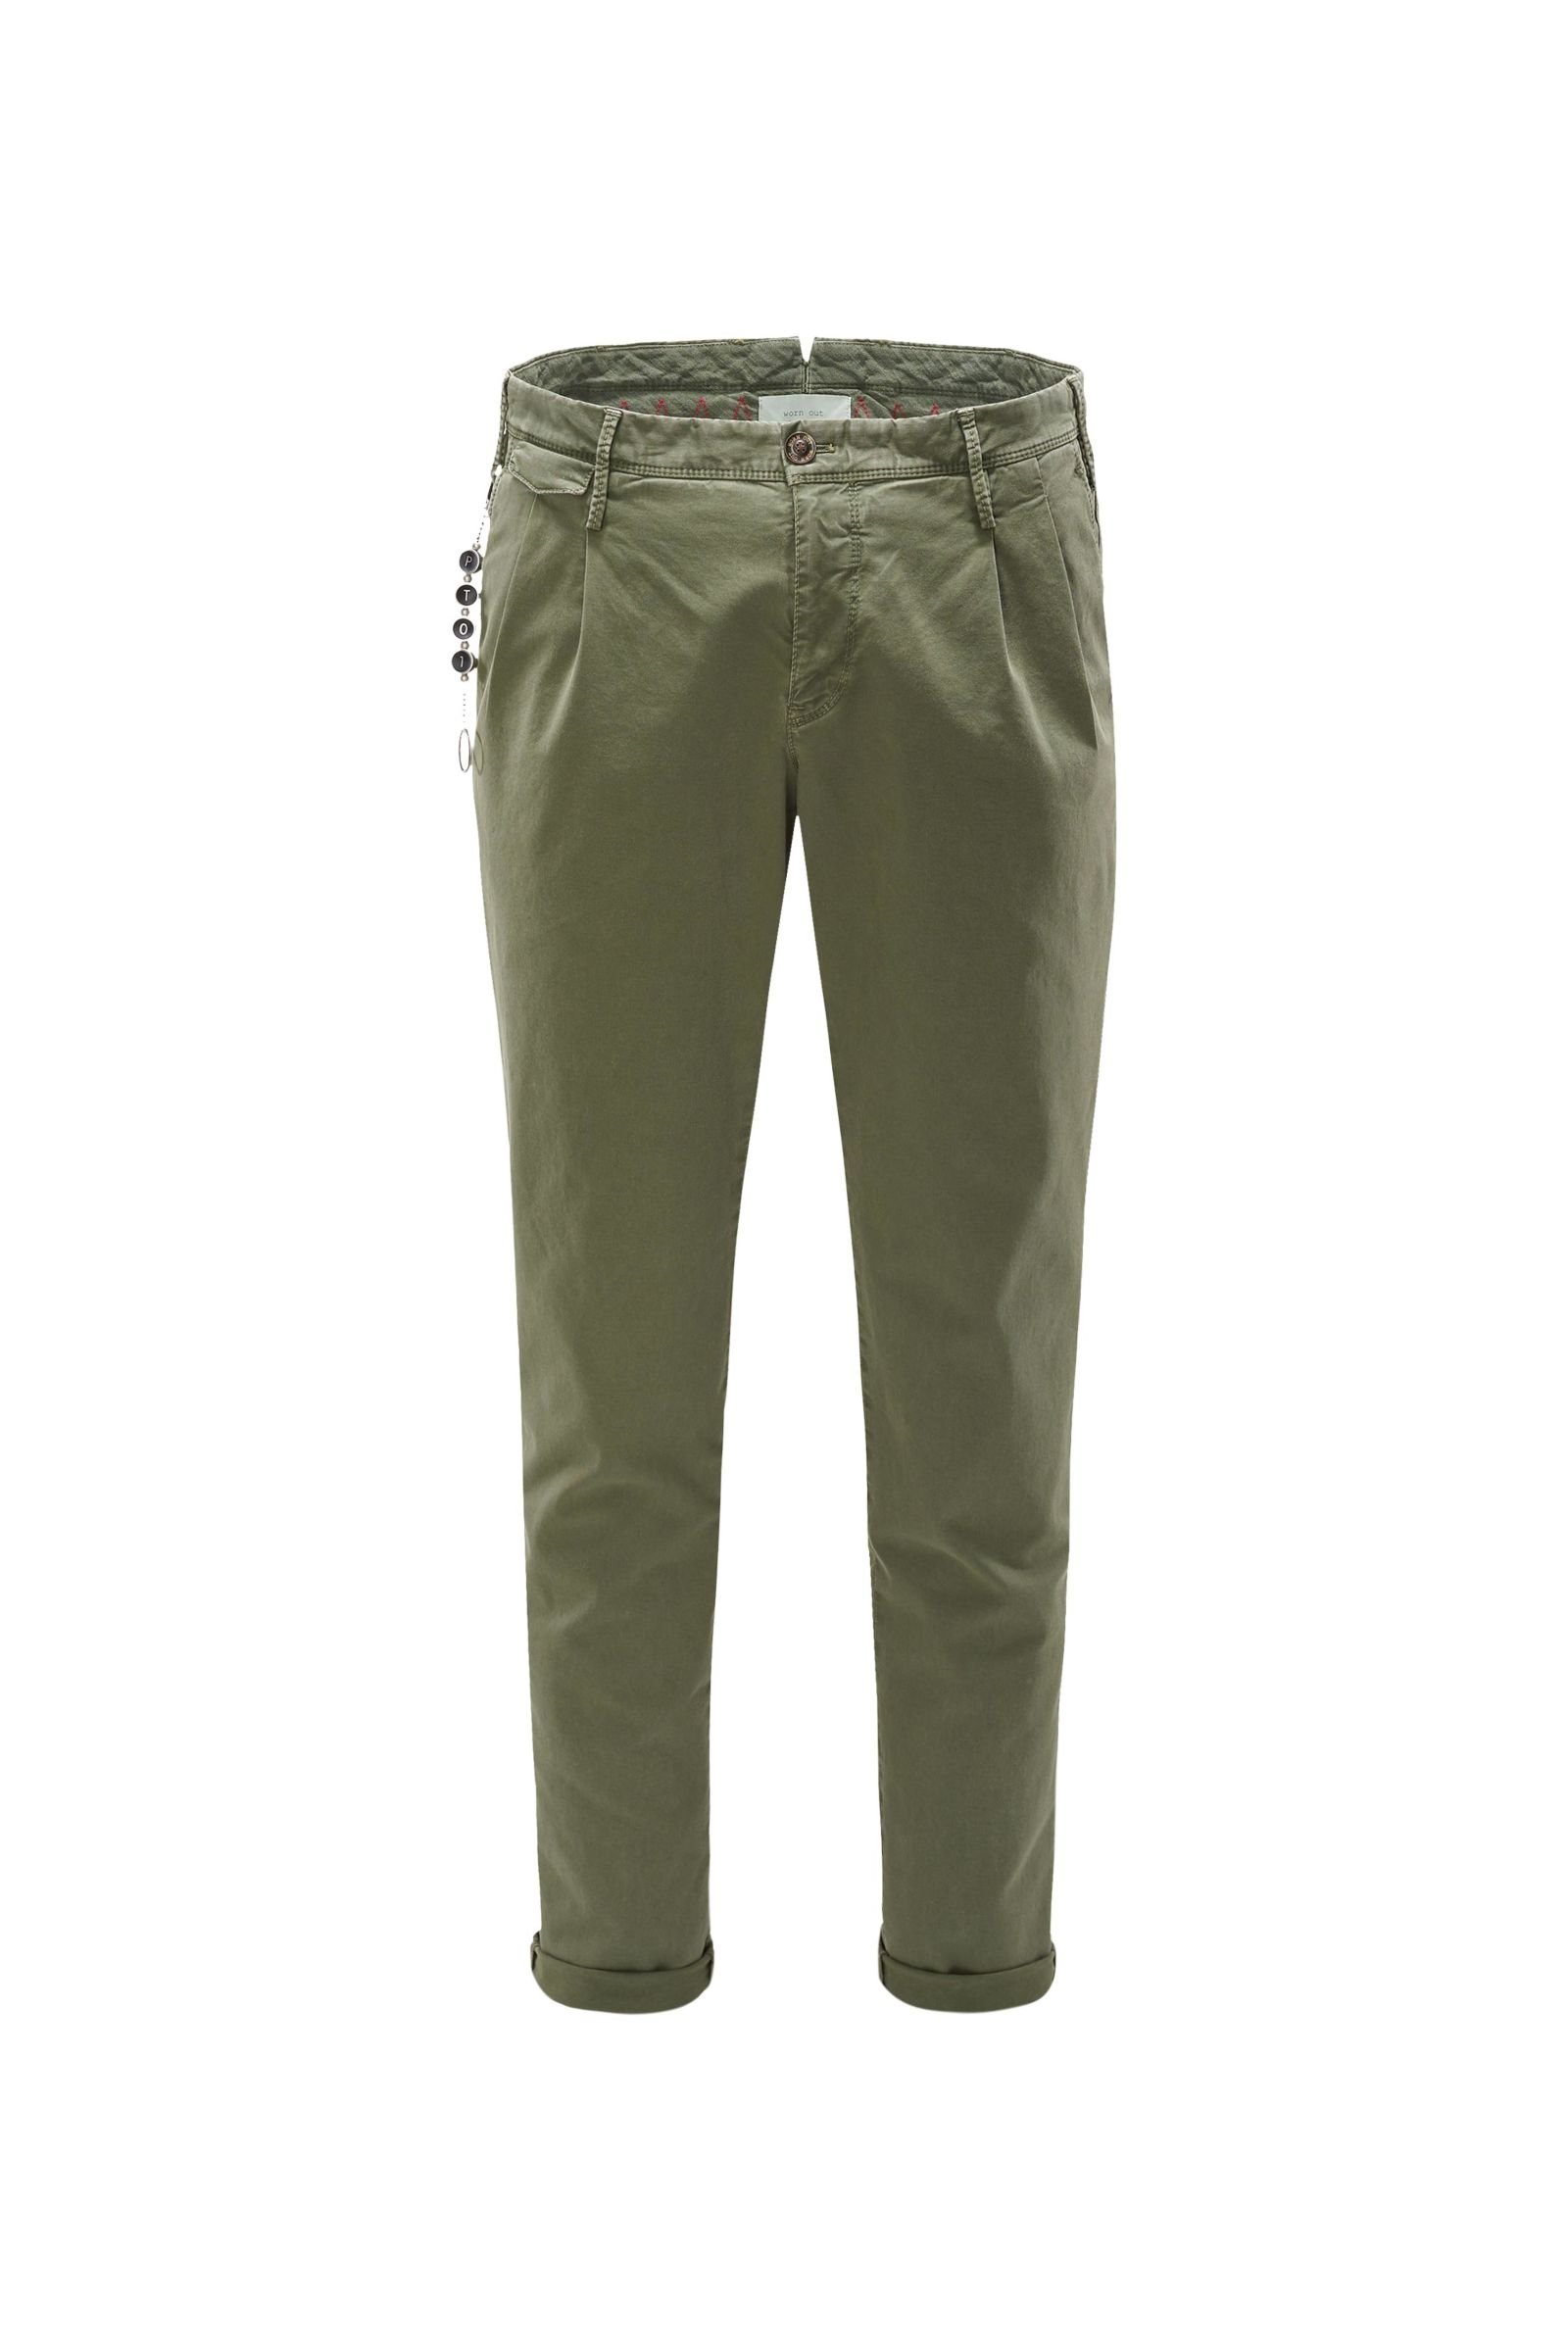 Cotton trousers 'Arial Worn out Elegance' olive